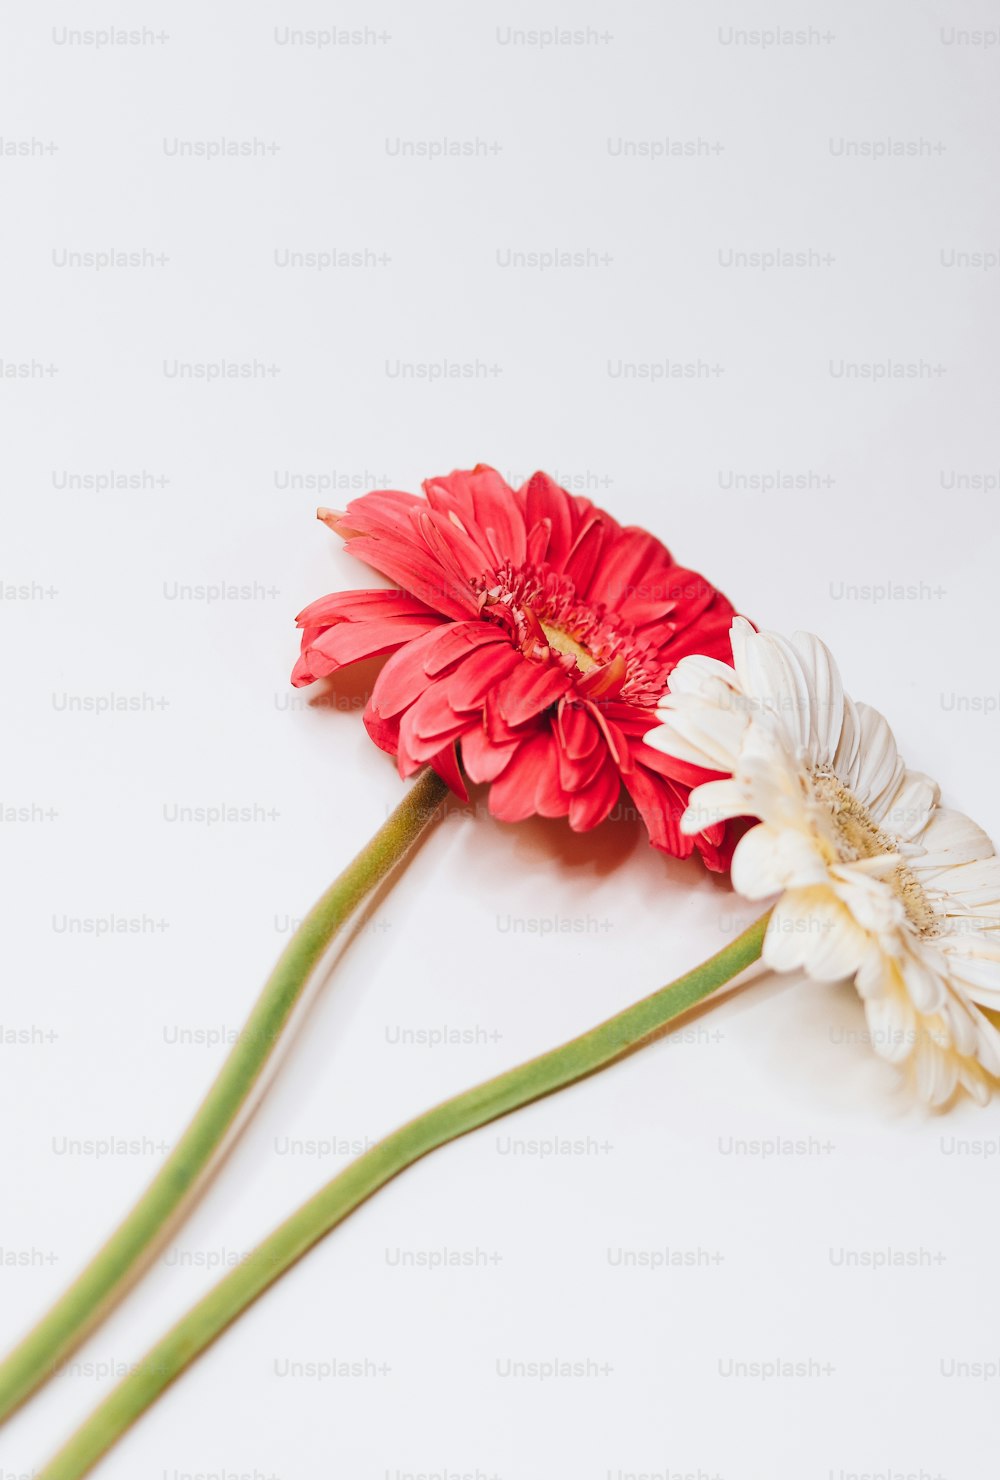 two red and white flowers on a white surface